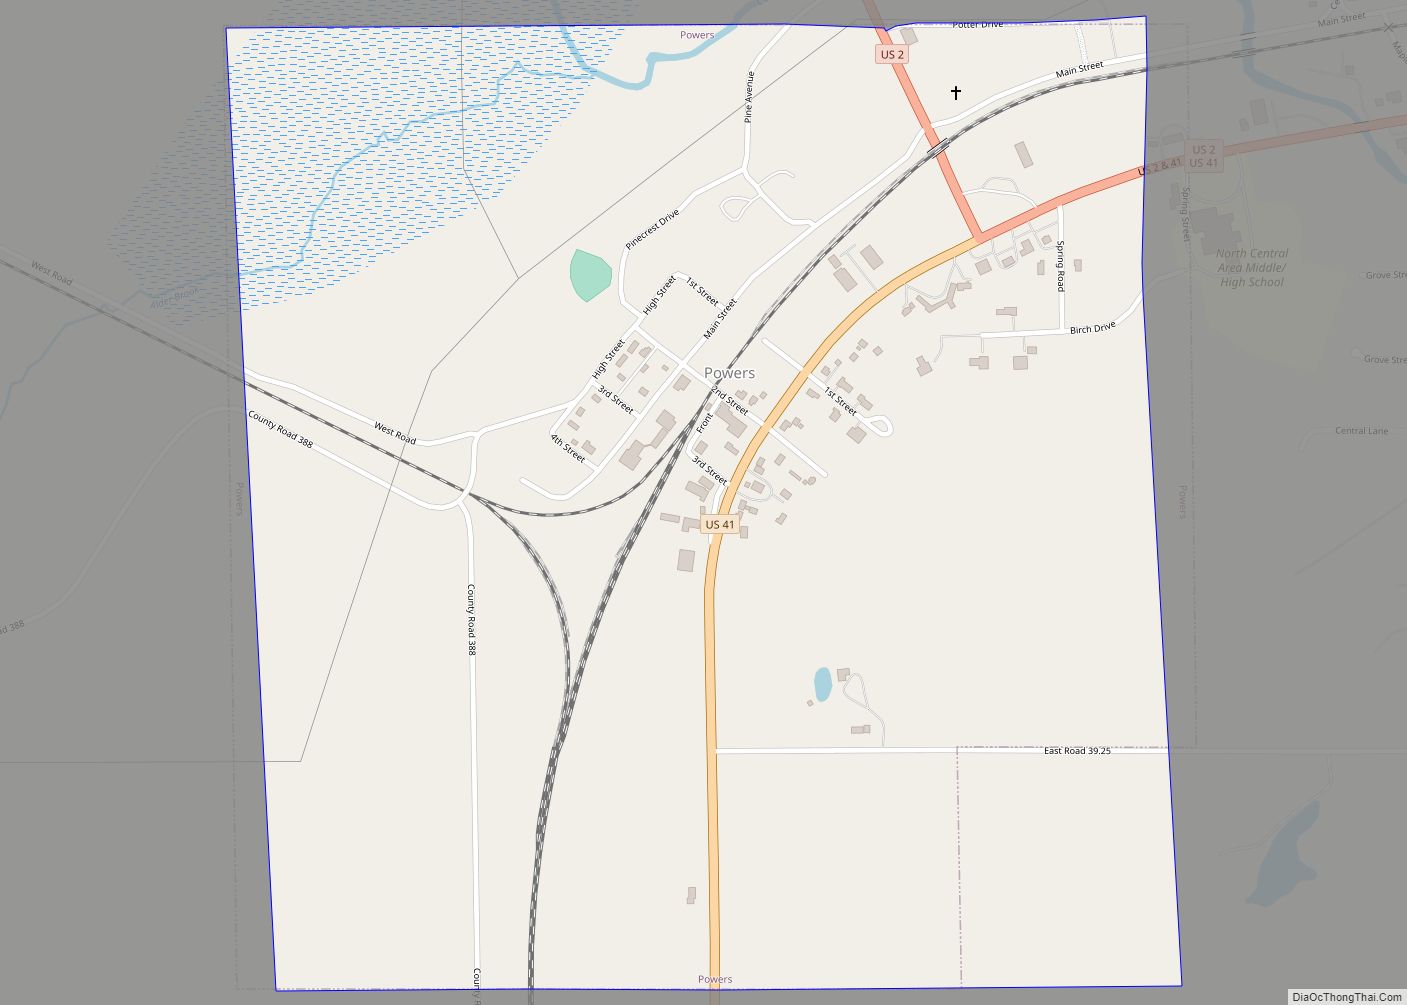 Map of Powers village